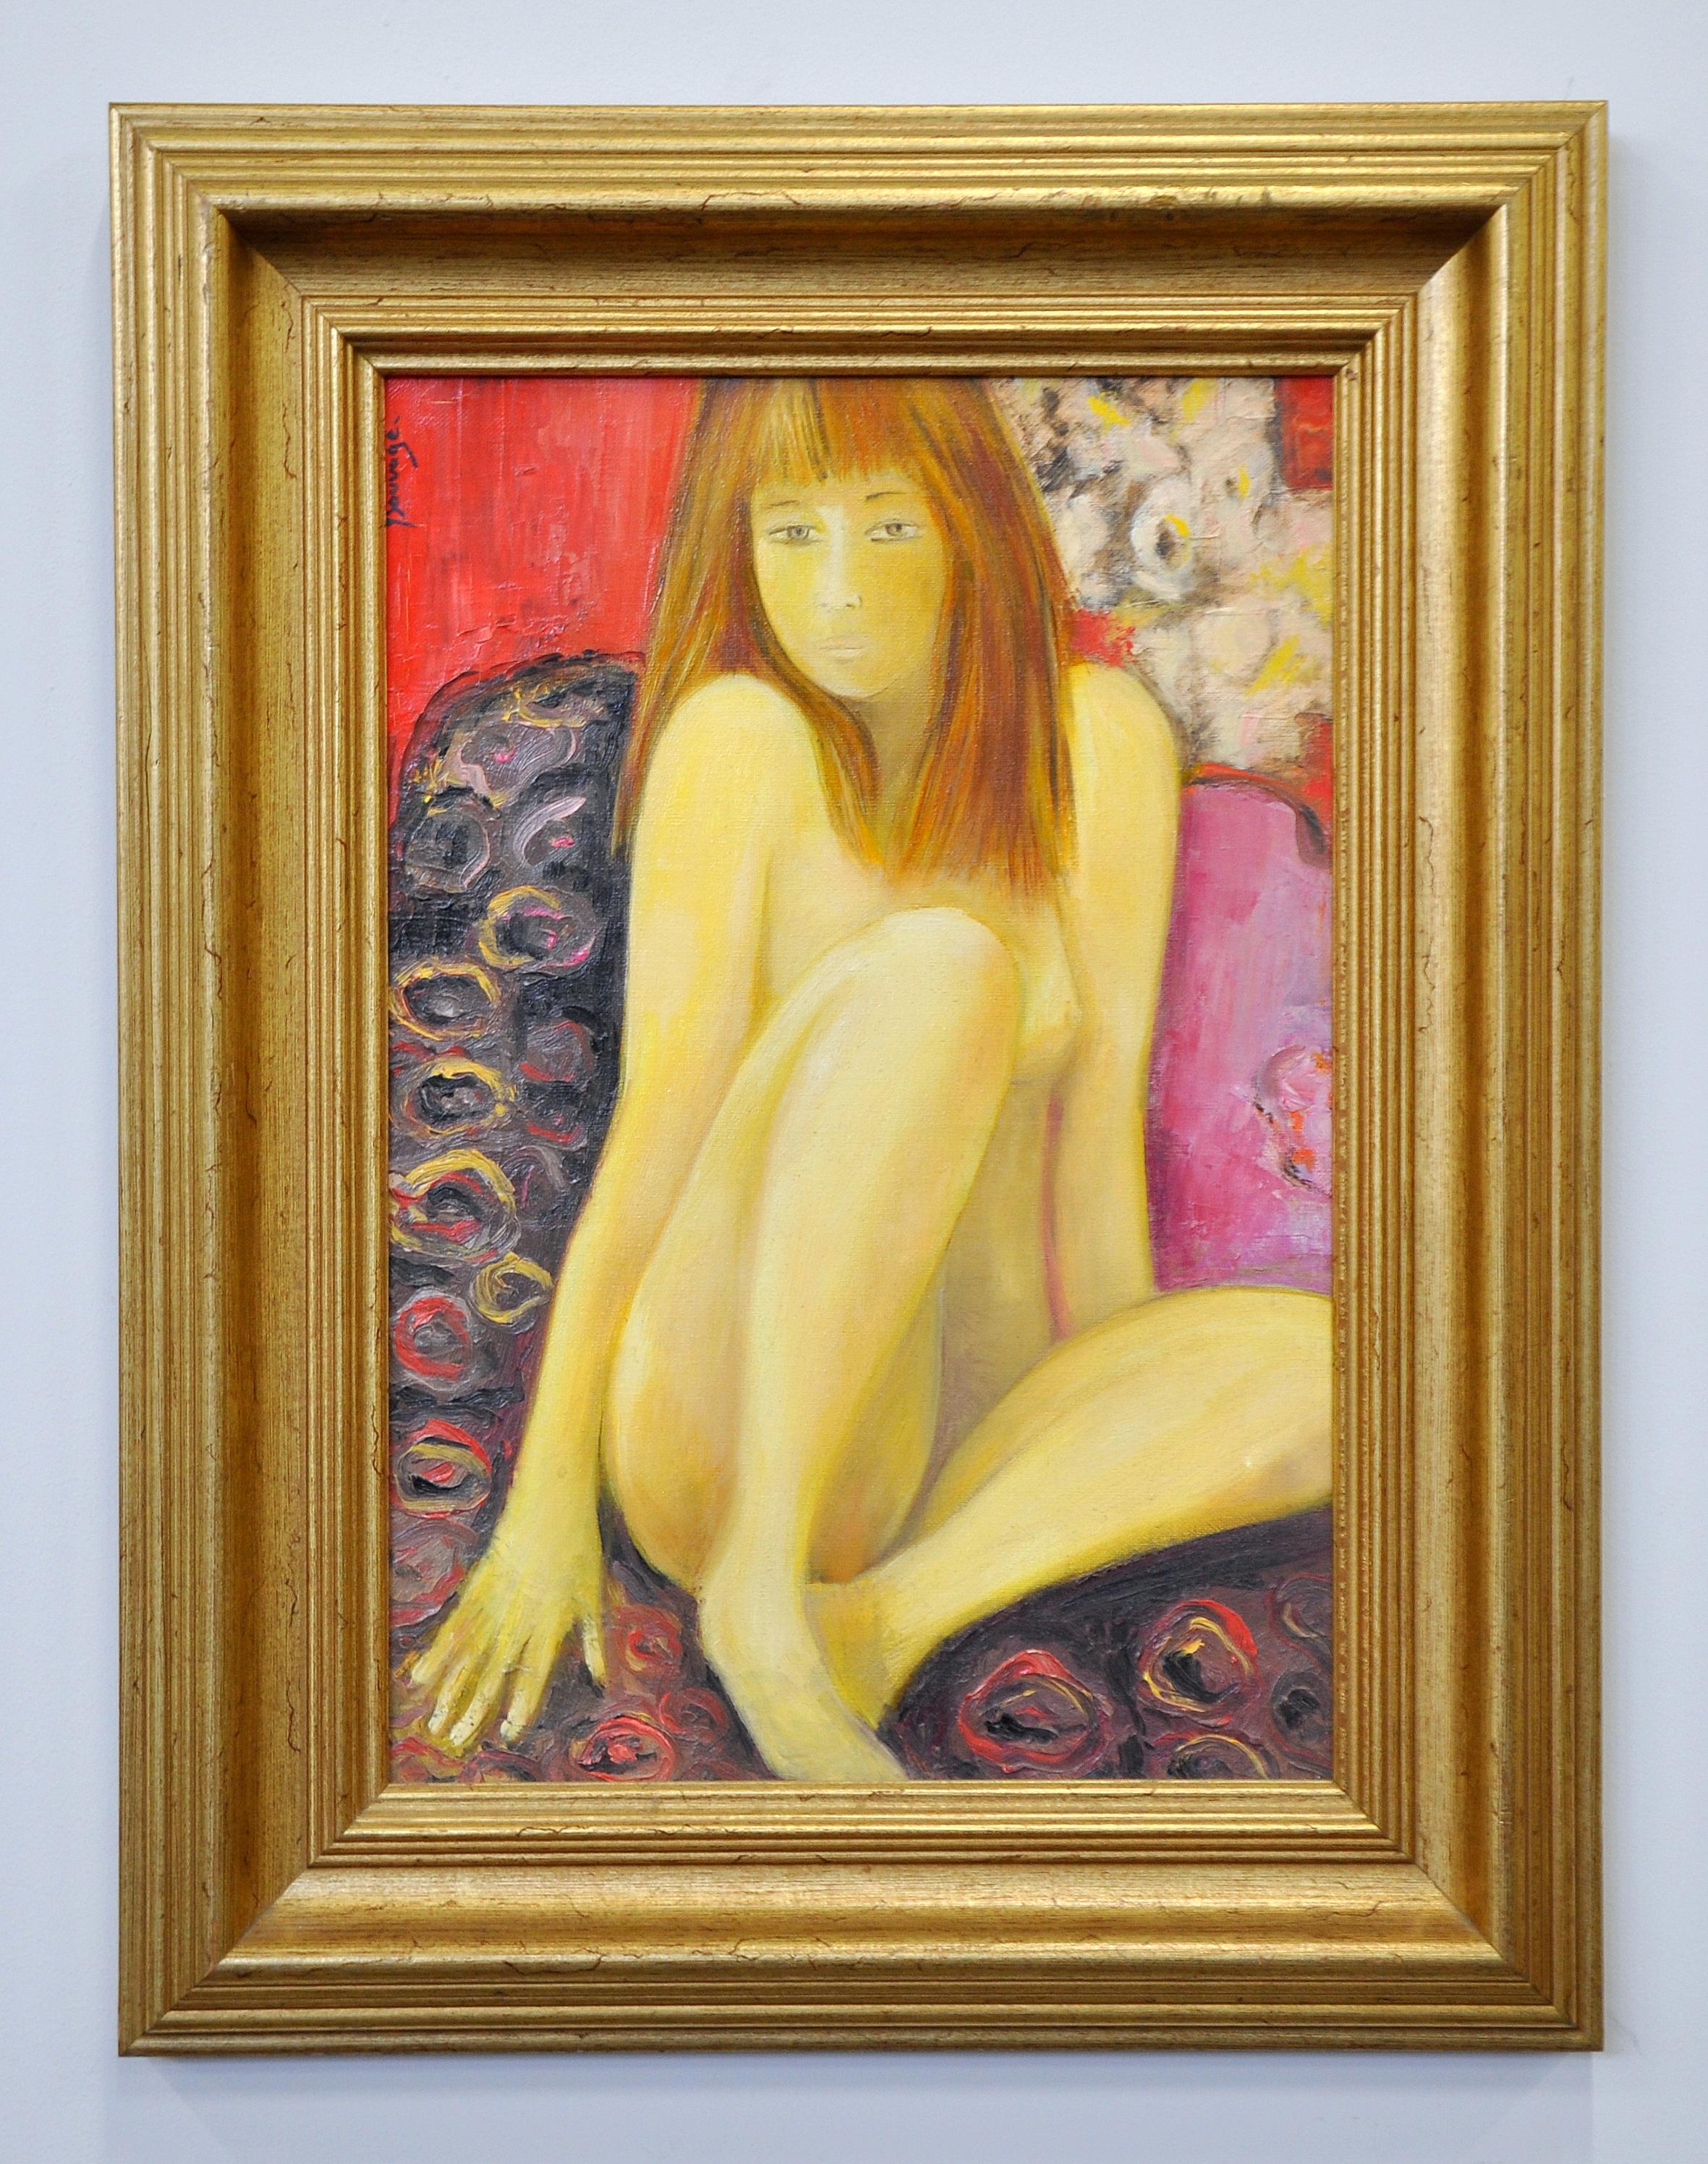 Unknown Figurative Painting - Nue Sauvage, Nude Girl, Oil Painting on Canvas